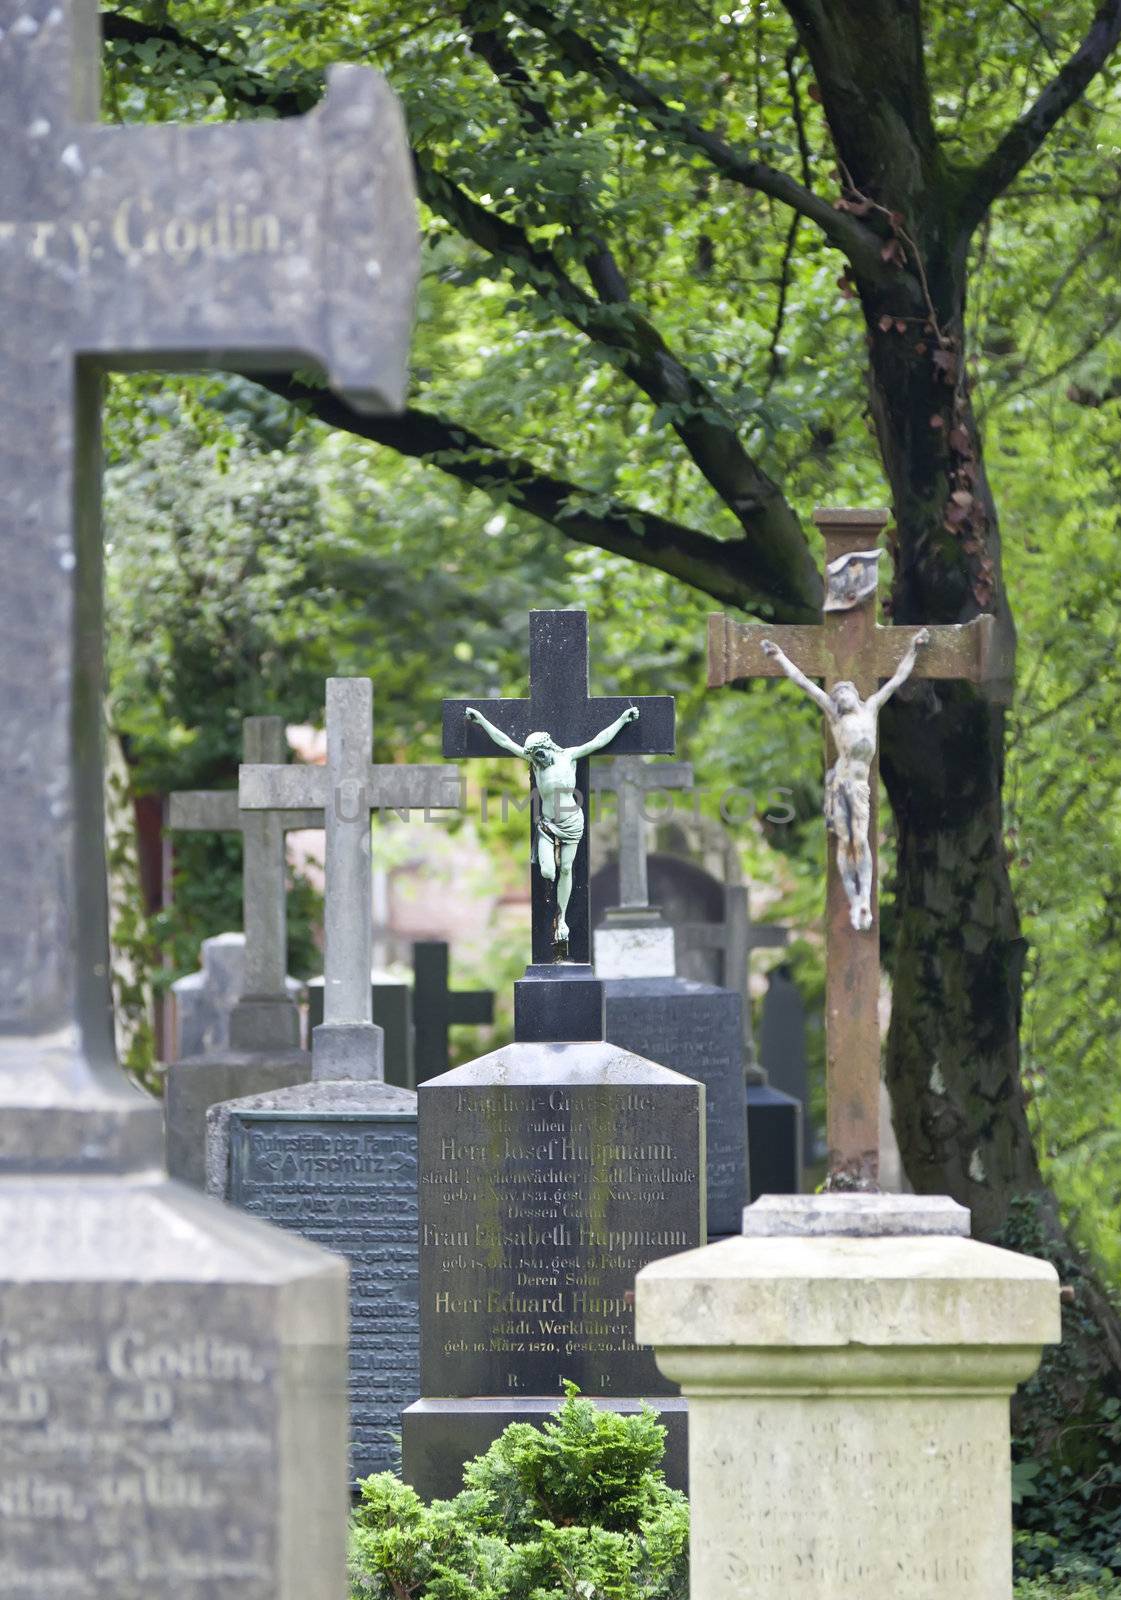 An image of the munich south cemetery